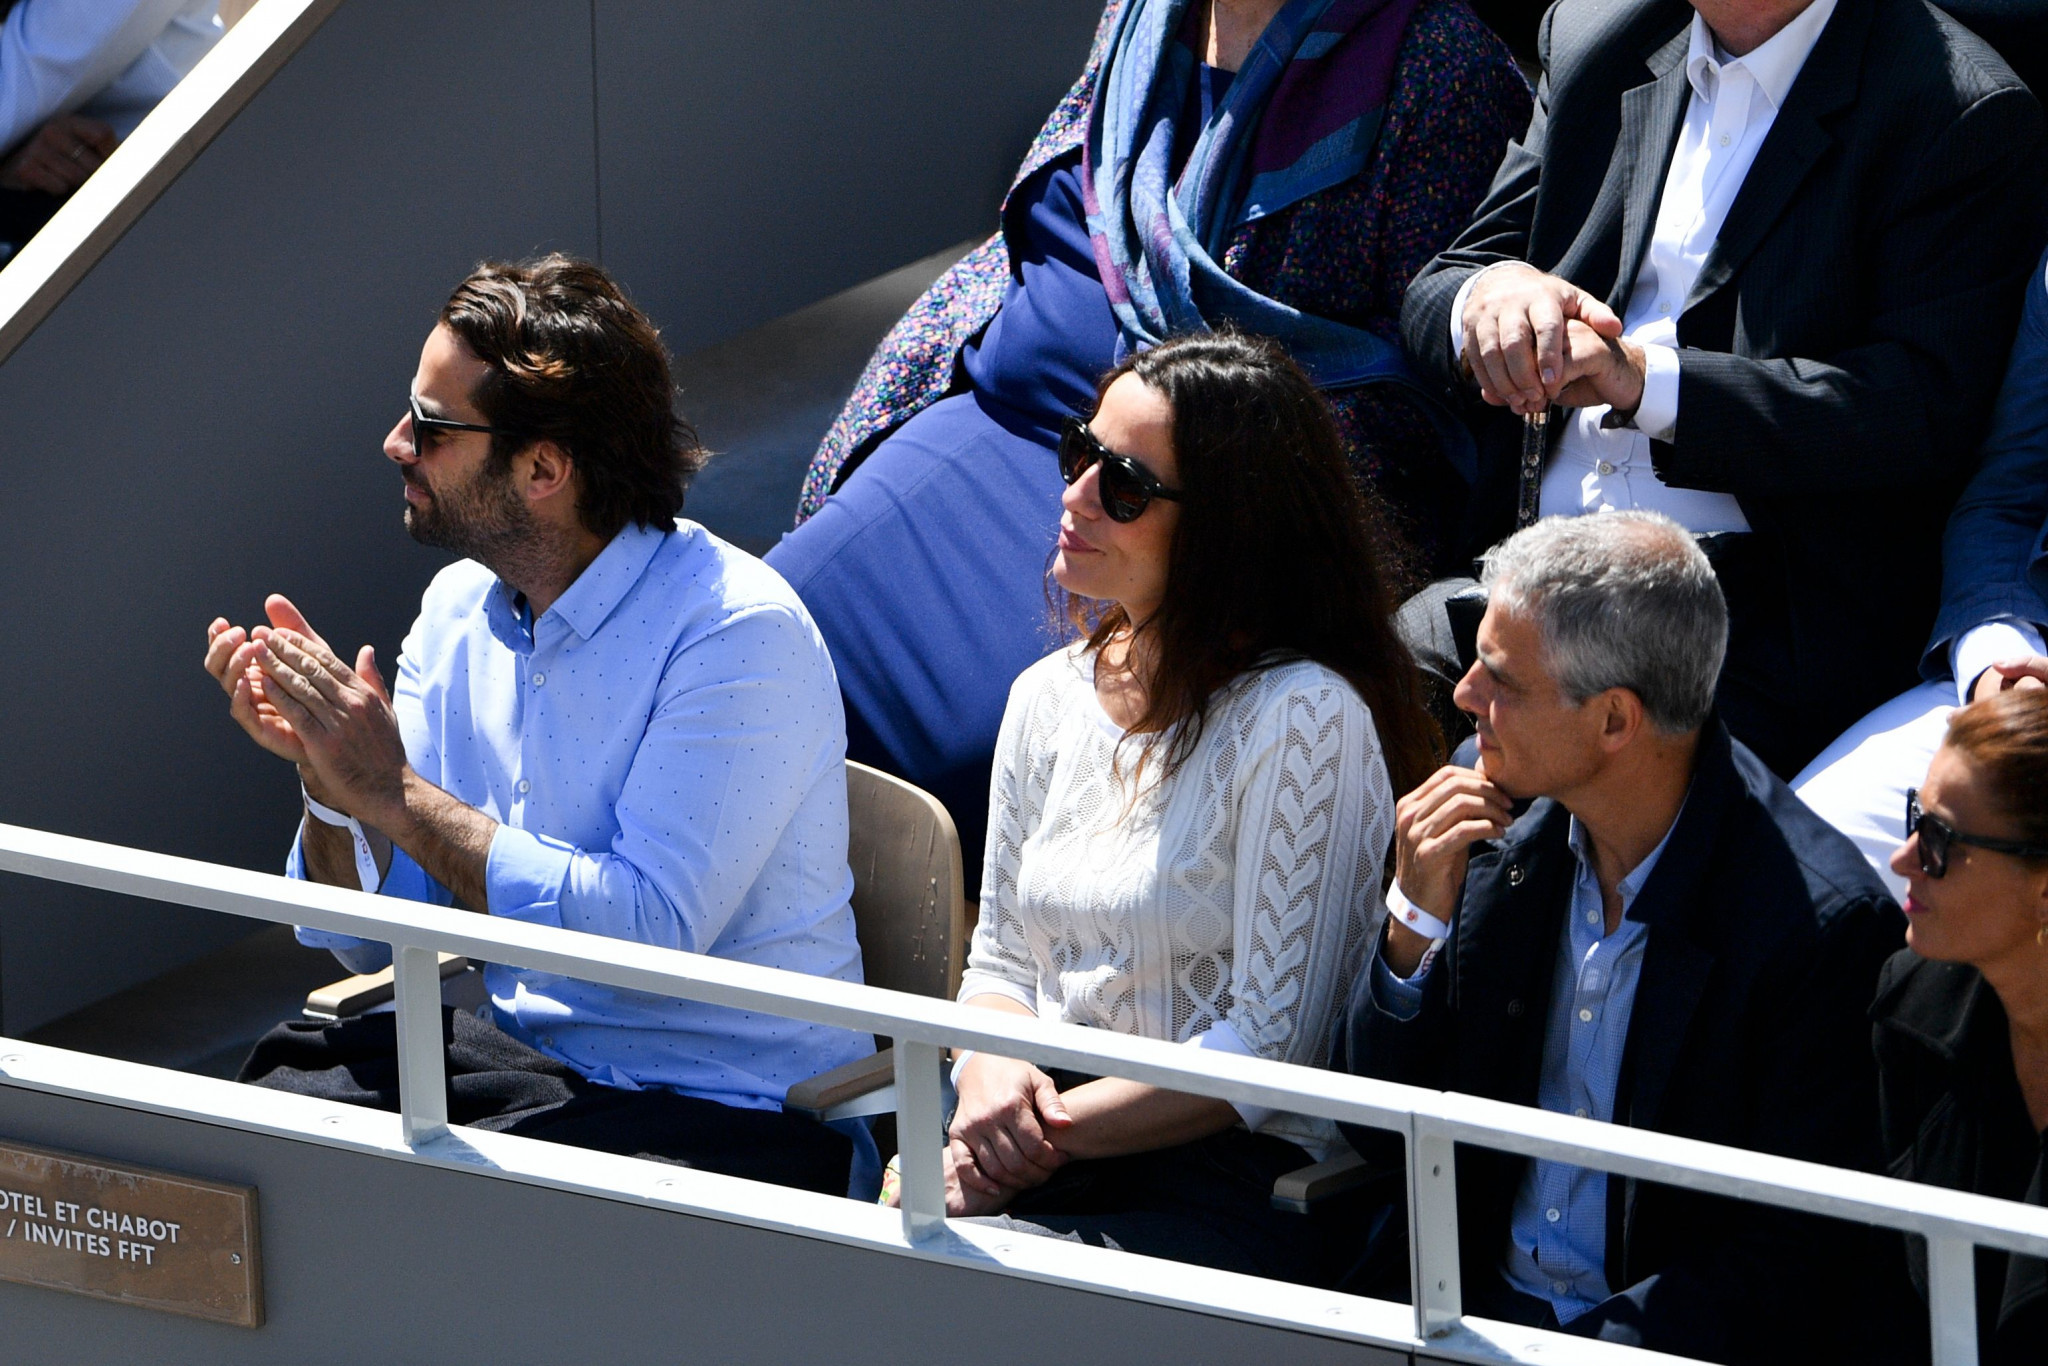 French actress Zoe Felix, centre, enjoys the men's French Open semi-final between Djokovic and Thiem ©Getty Images